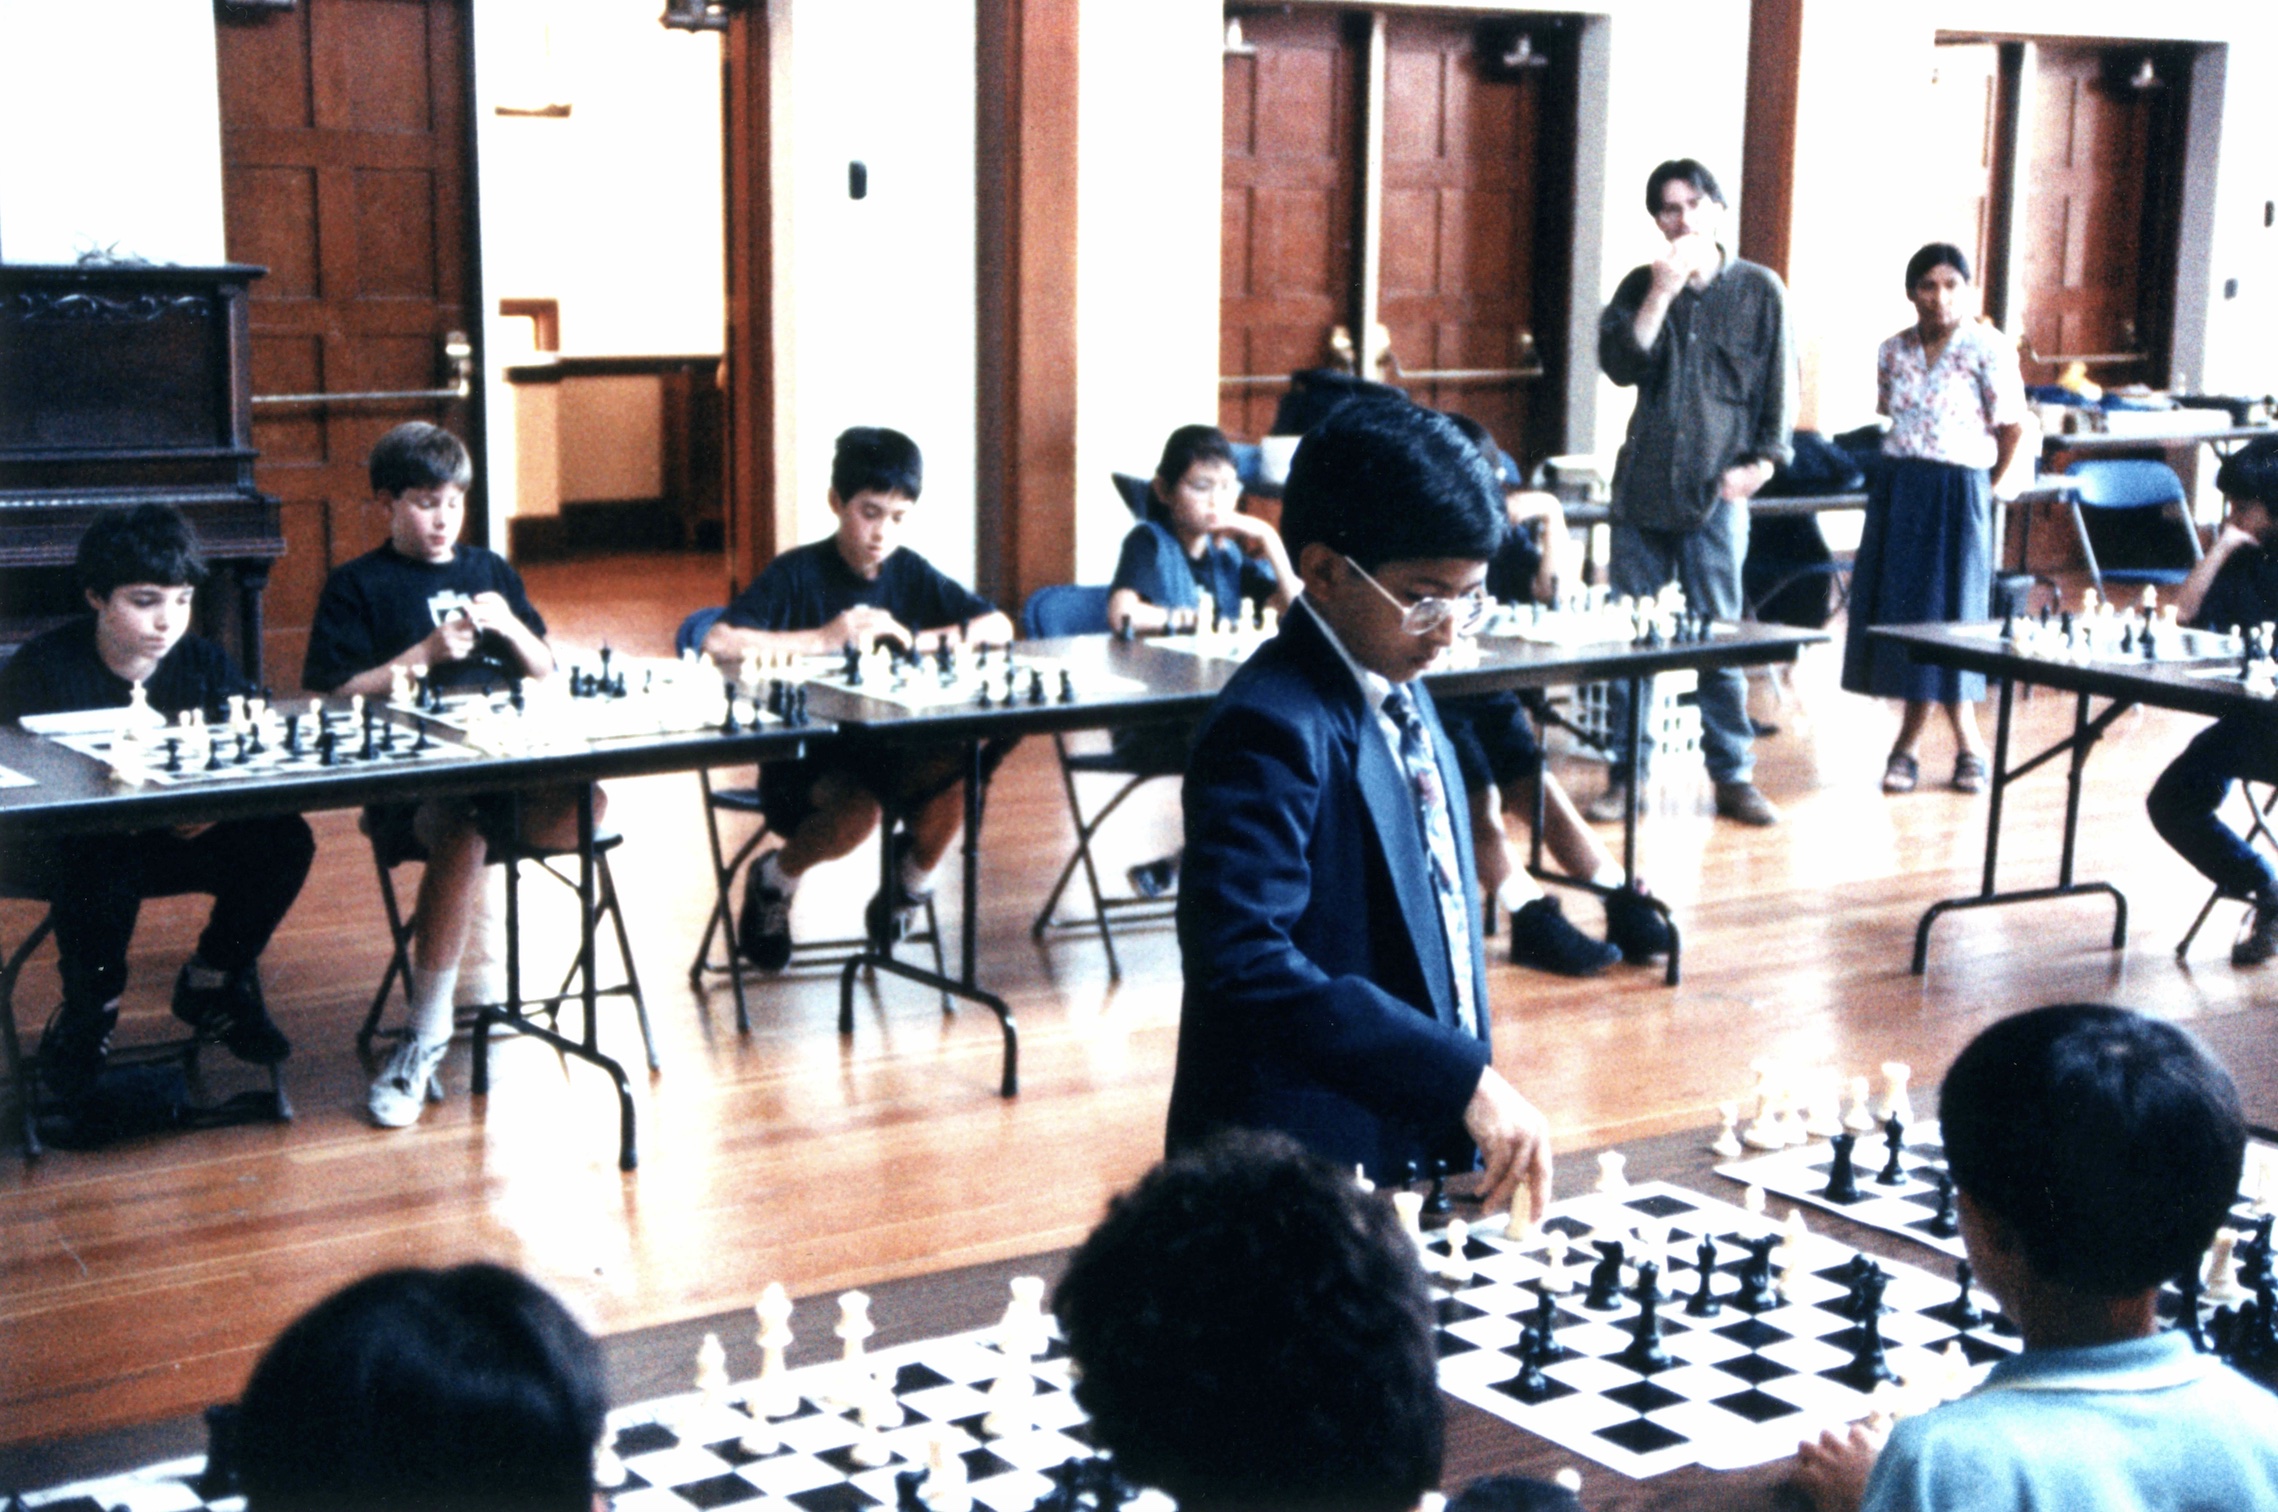 Master Chess Online - Agate Private School